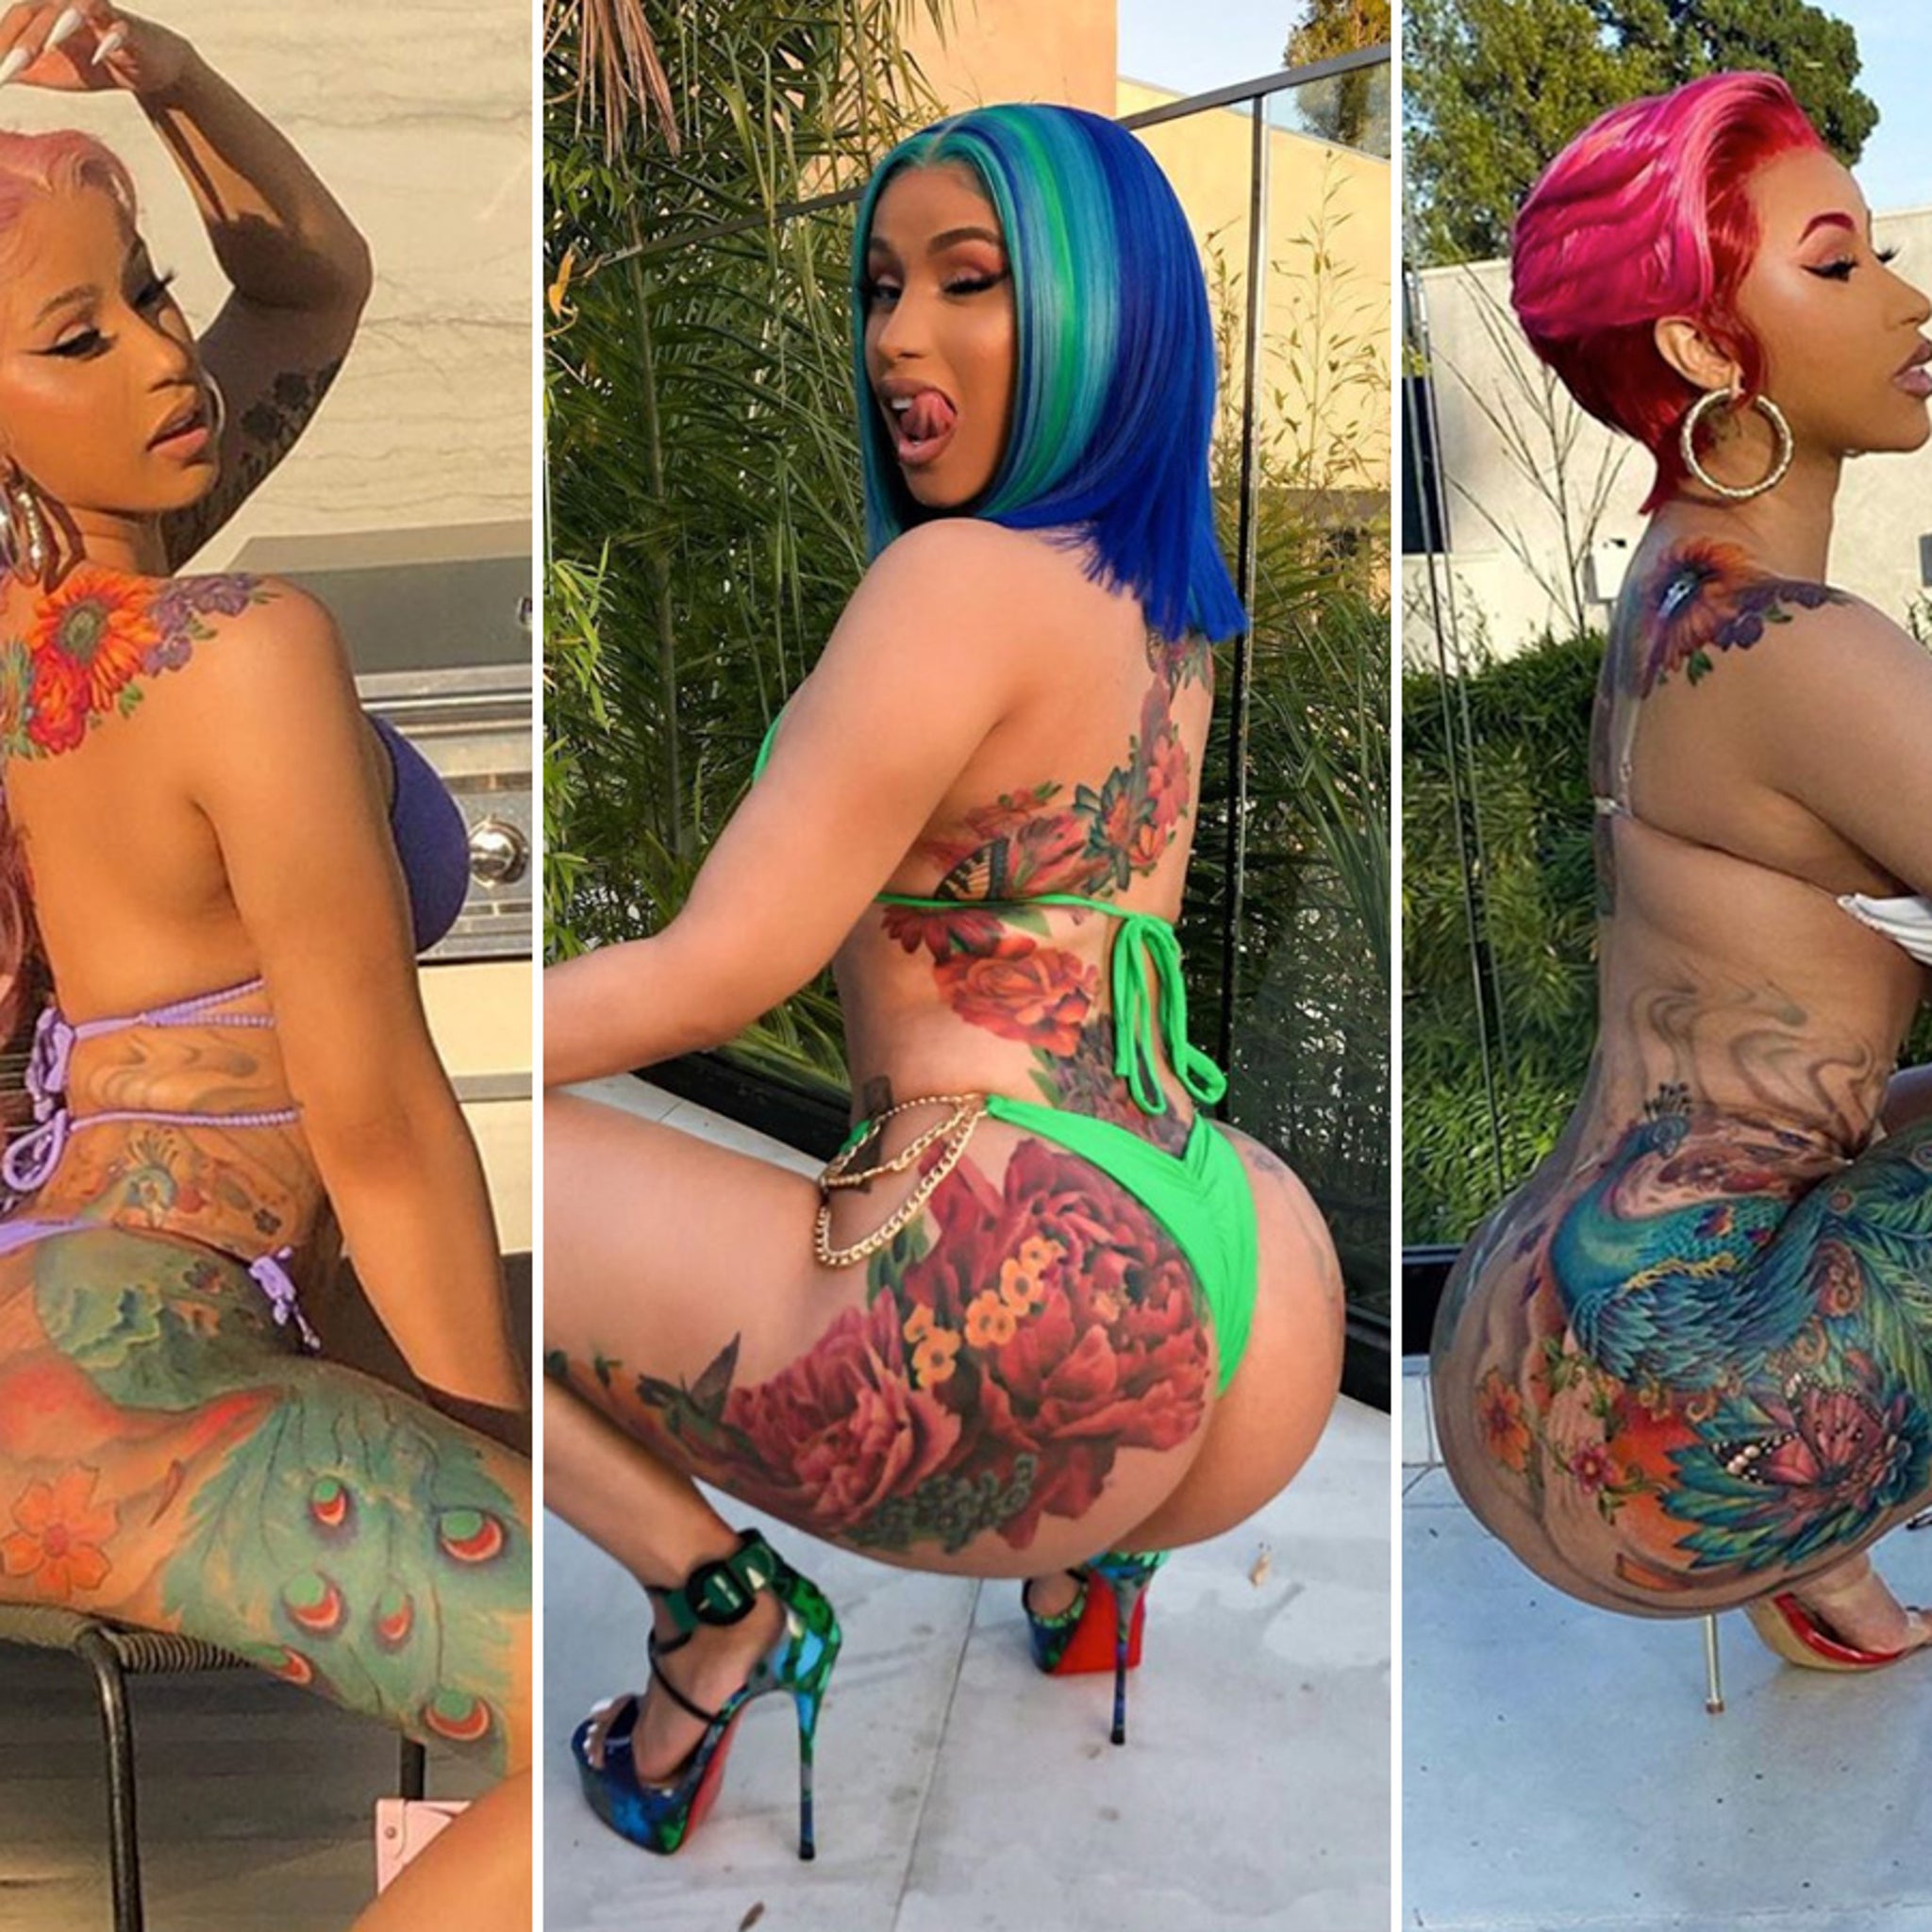 chelsea fournier recommends cardi b phat ass pic